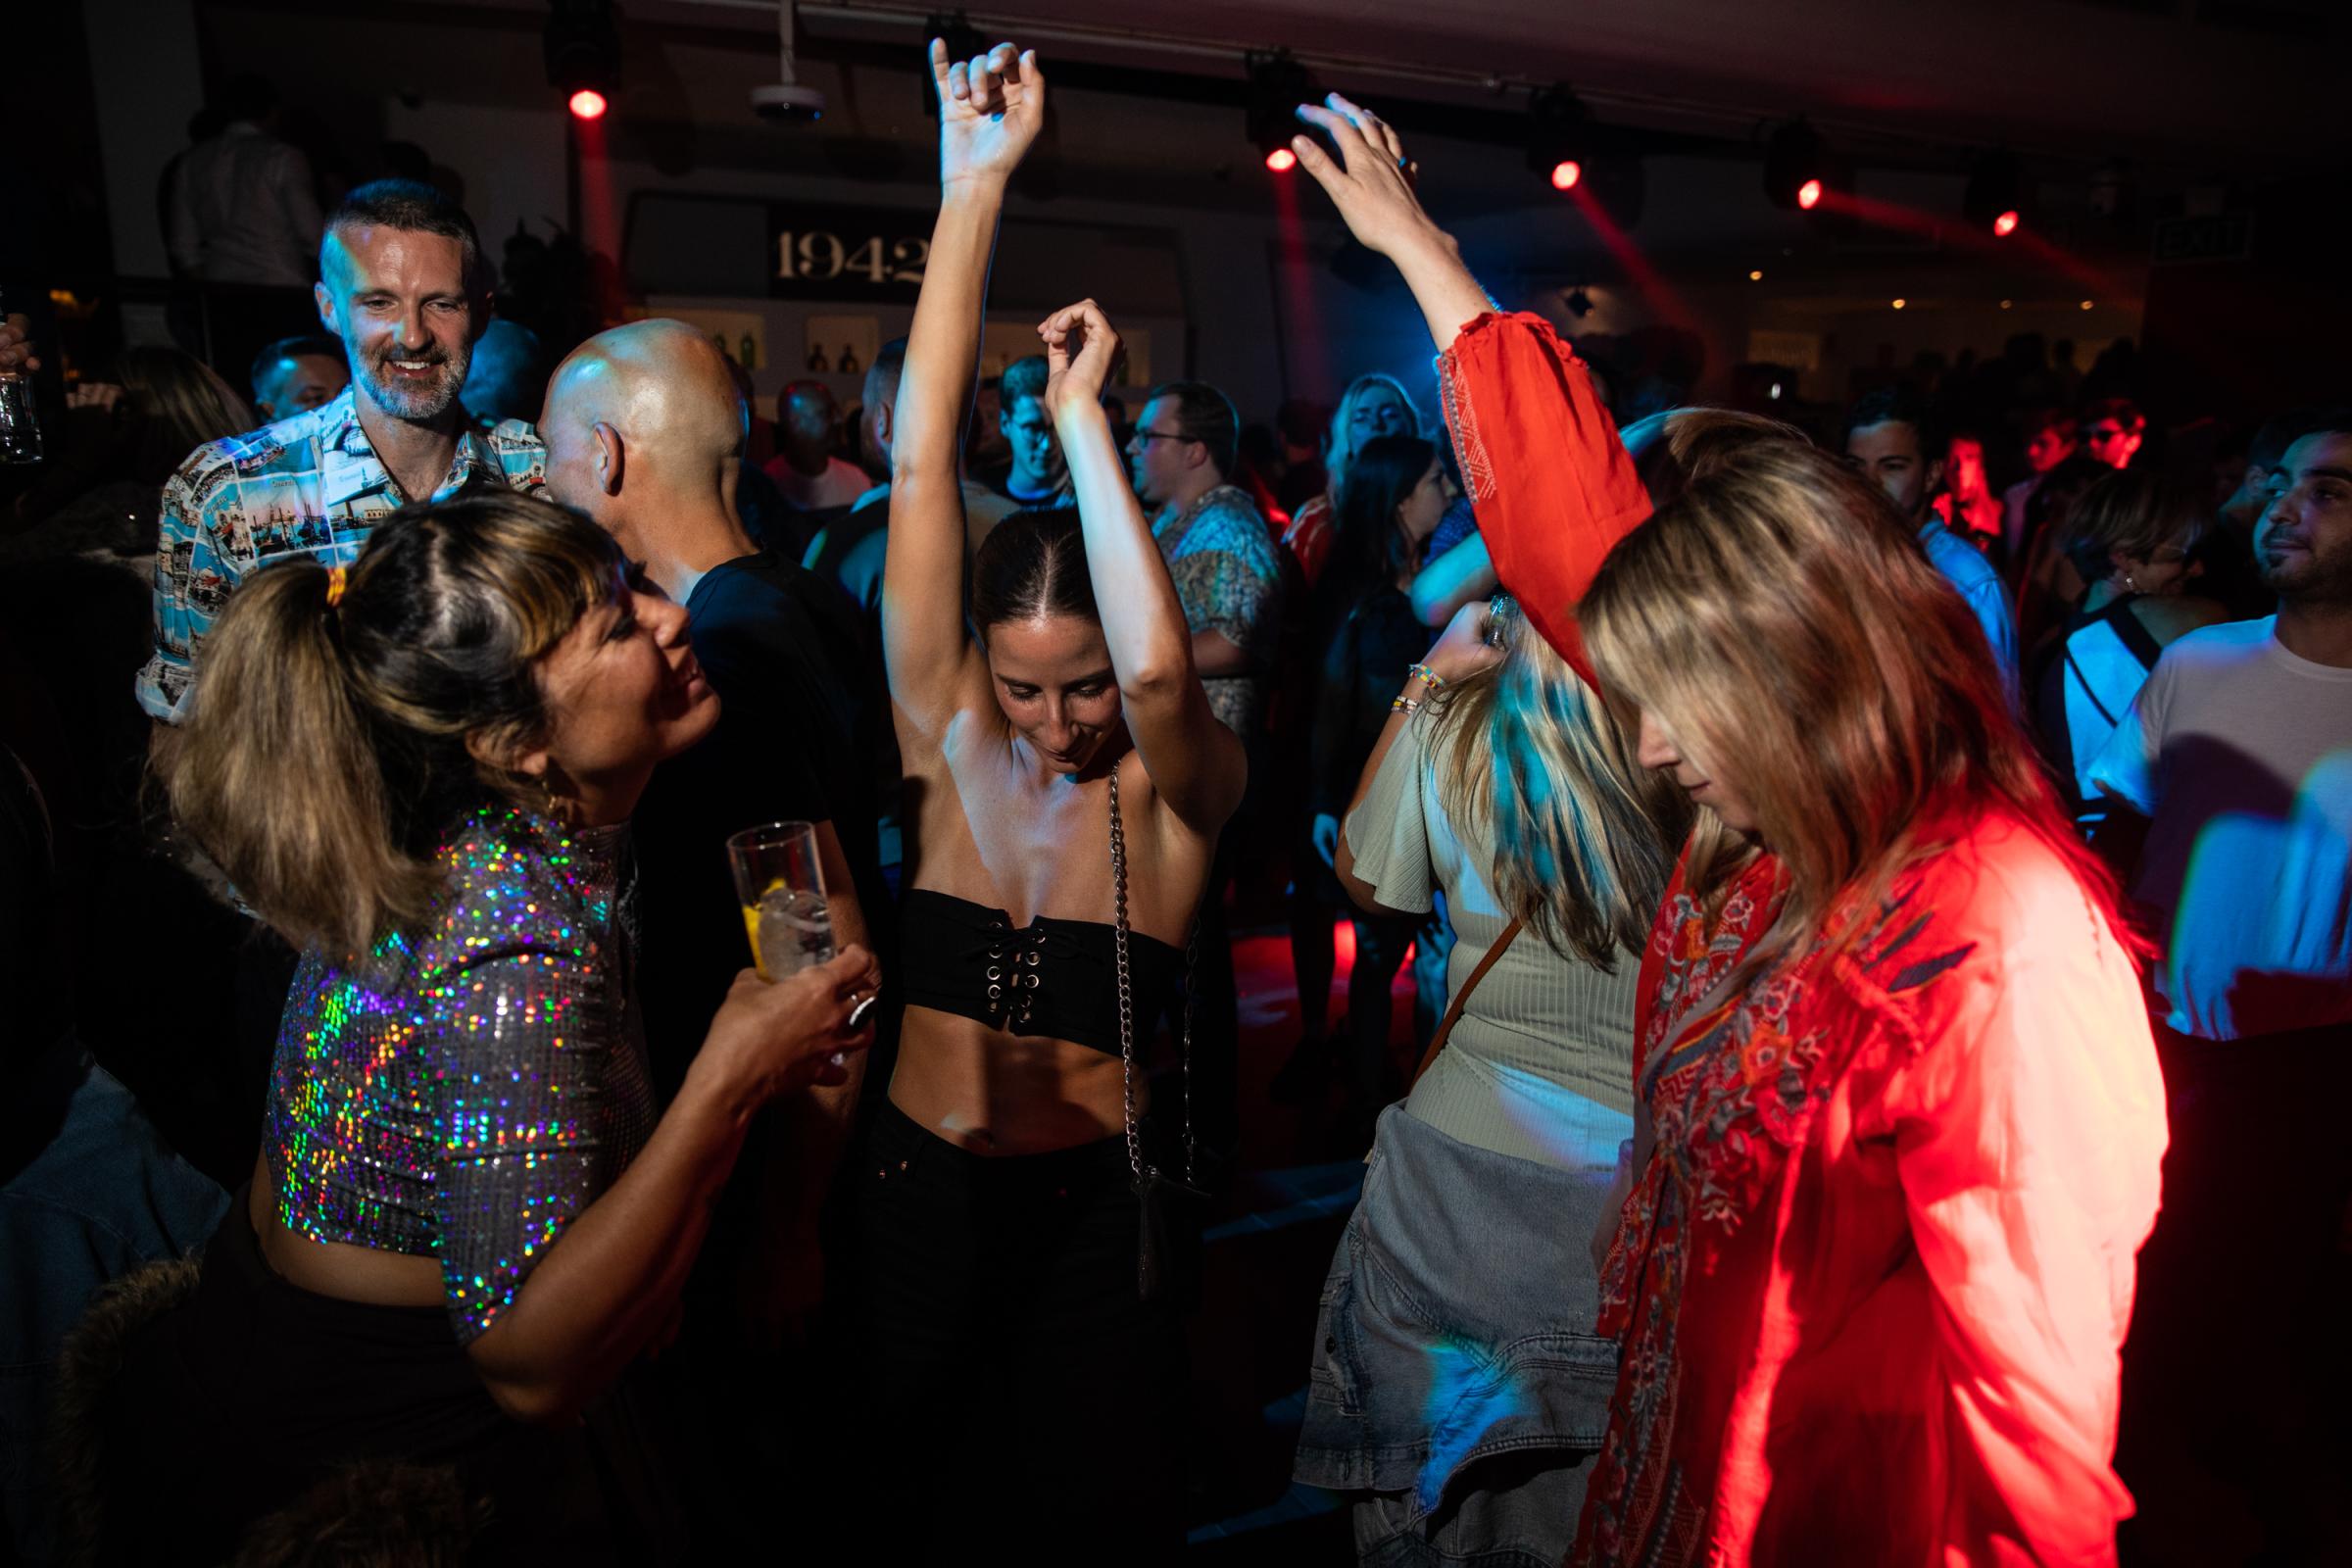 Grand Opening At Pacha Ibiza Heralds A Pre-Pandemic Party Season - Tourists dance in the Pacha Ibiza nightclub on April 30,...